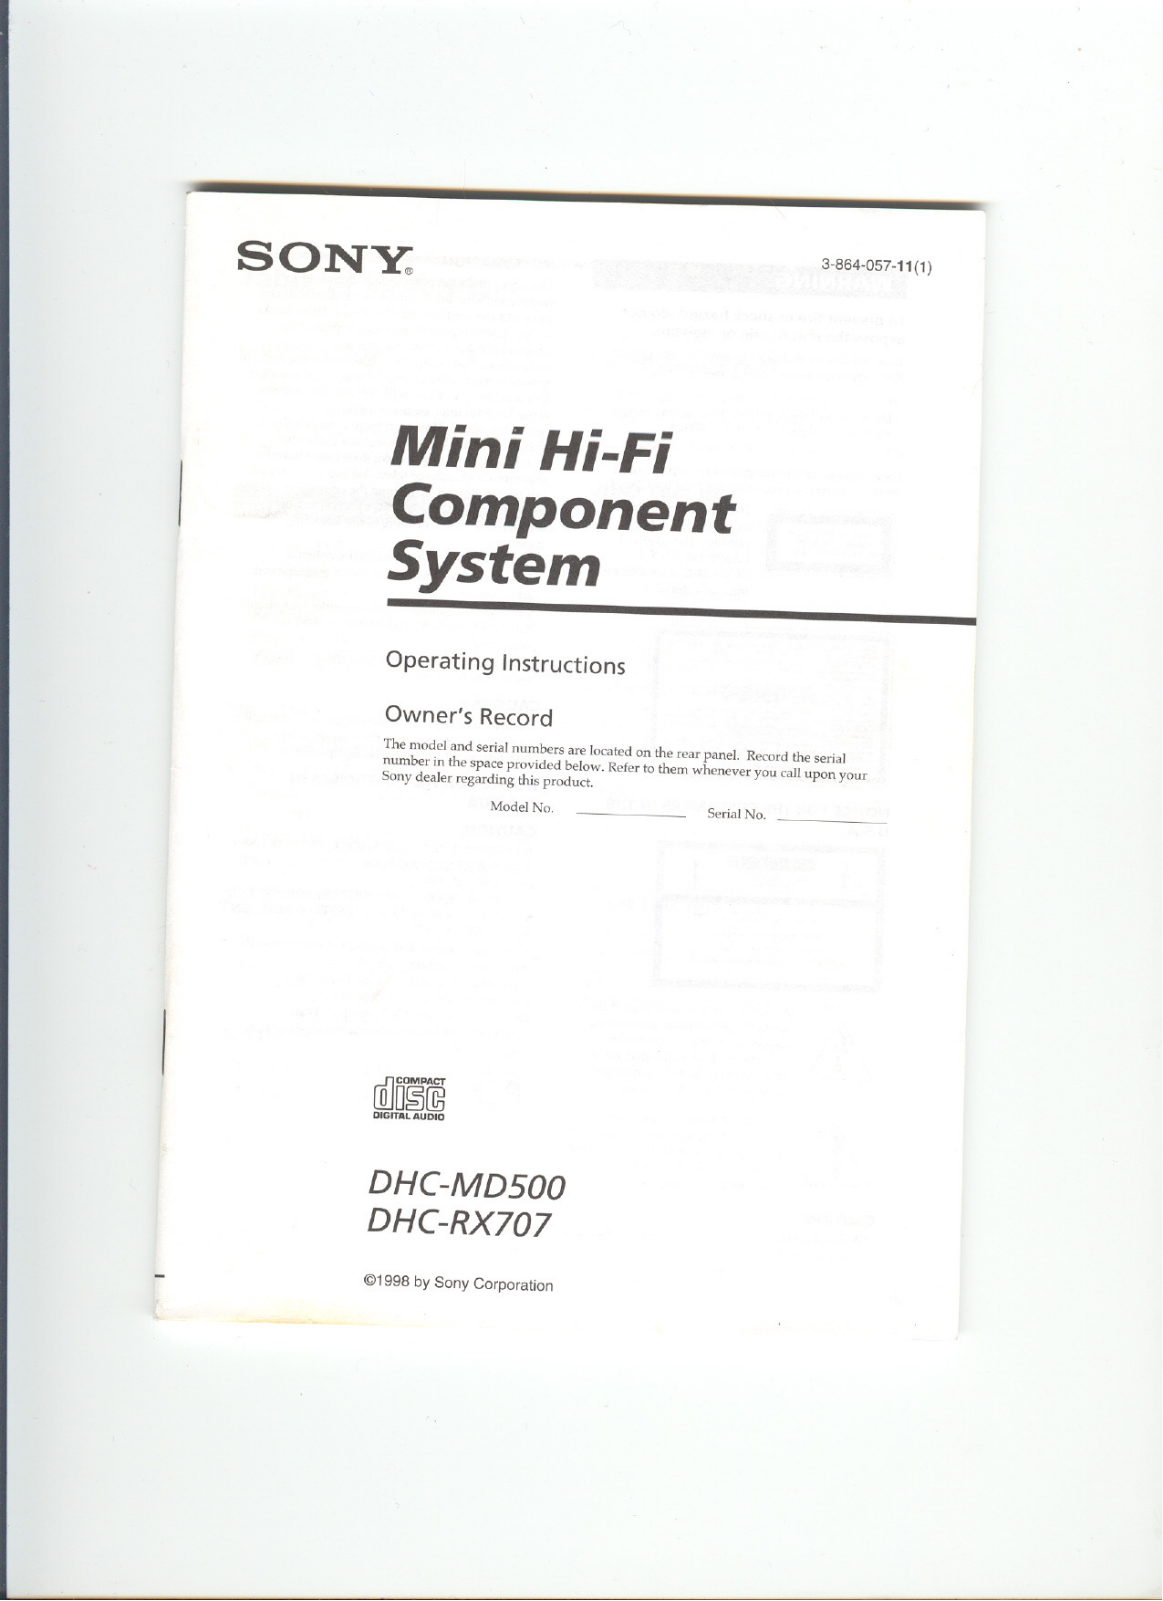 Sony DHCMD-500 Owners manual